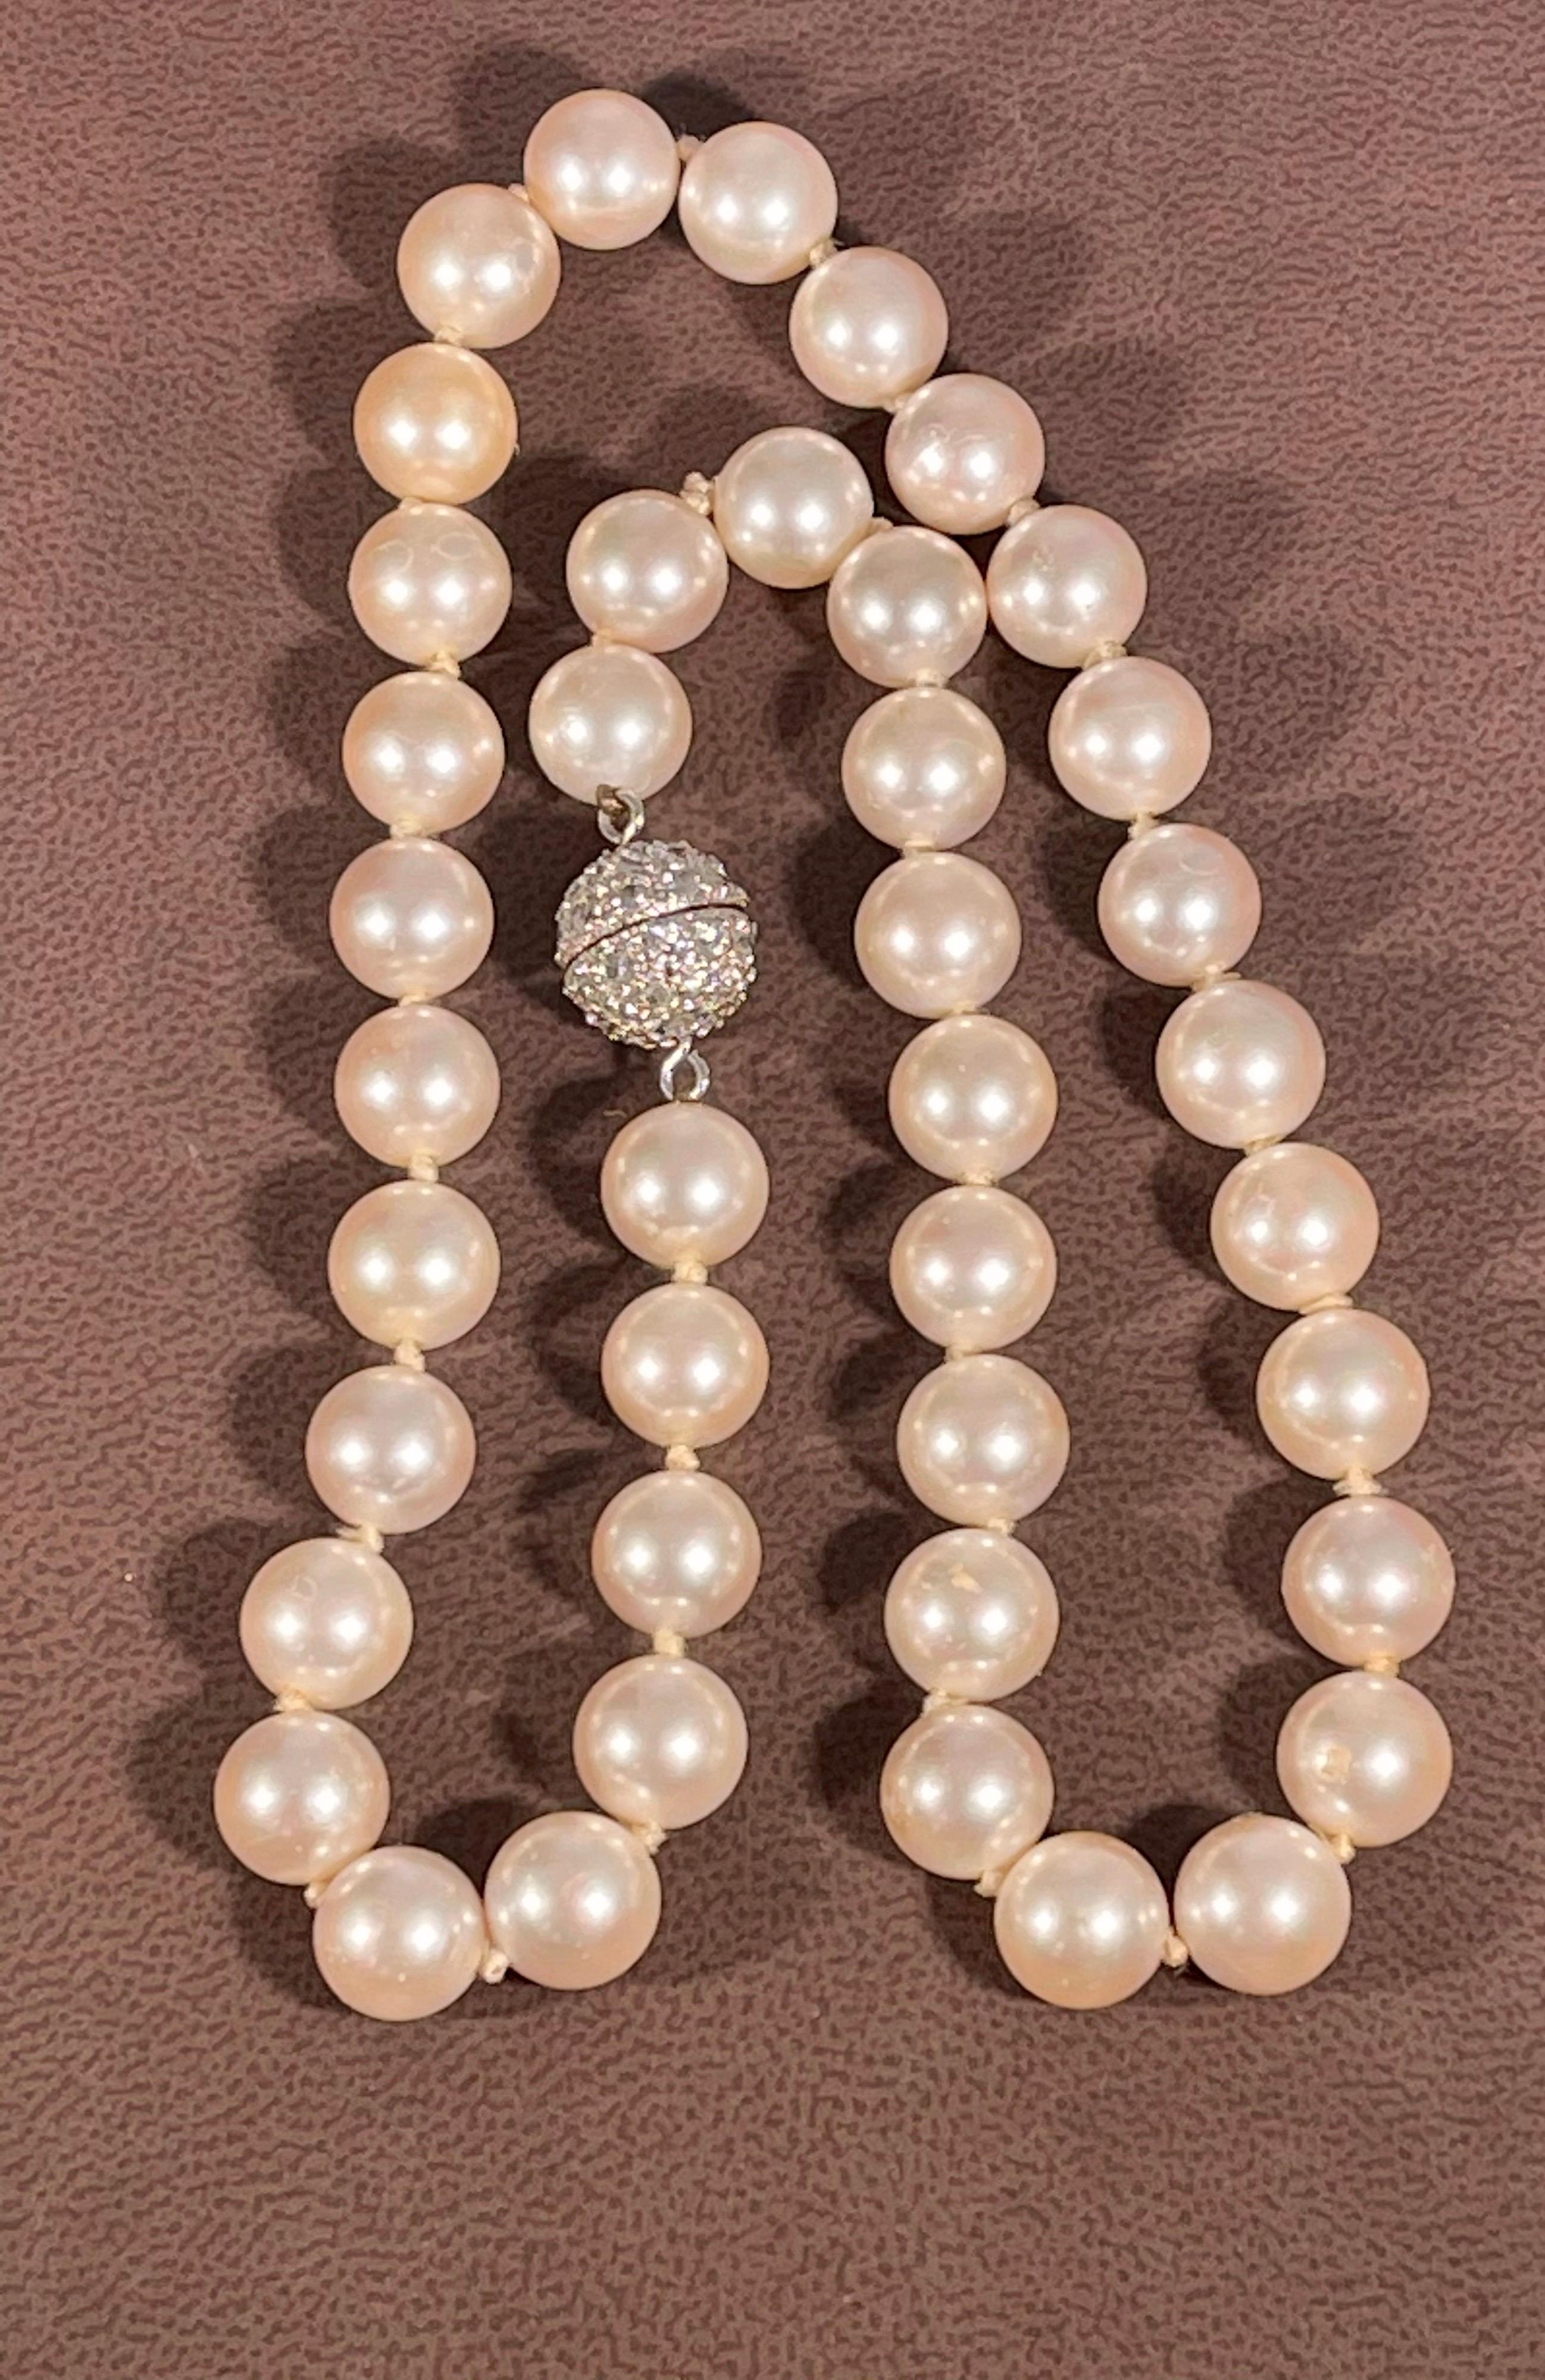 41 Round Akoya Pearls Strand Necklace Set in metal ball Clasp just look like diamonds
it is a very nice pearl necklace.
18 Inch long
metal clasp with zirconium stone
9-10   mm Pearls  
metal ball clasp with stones all around it.
Zirconium